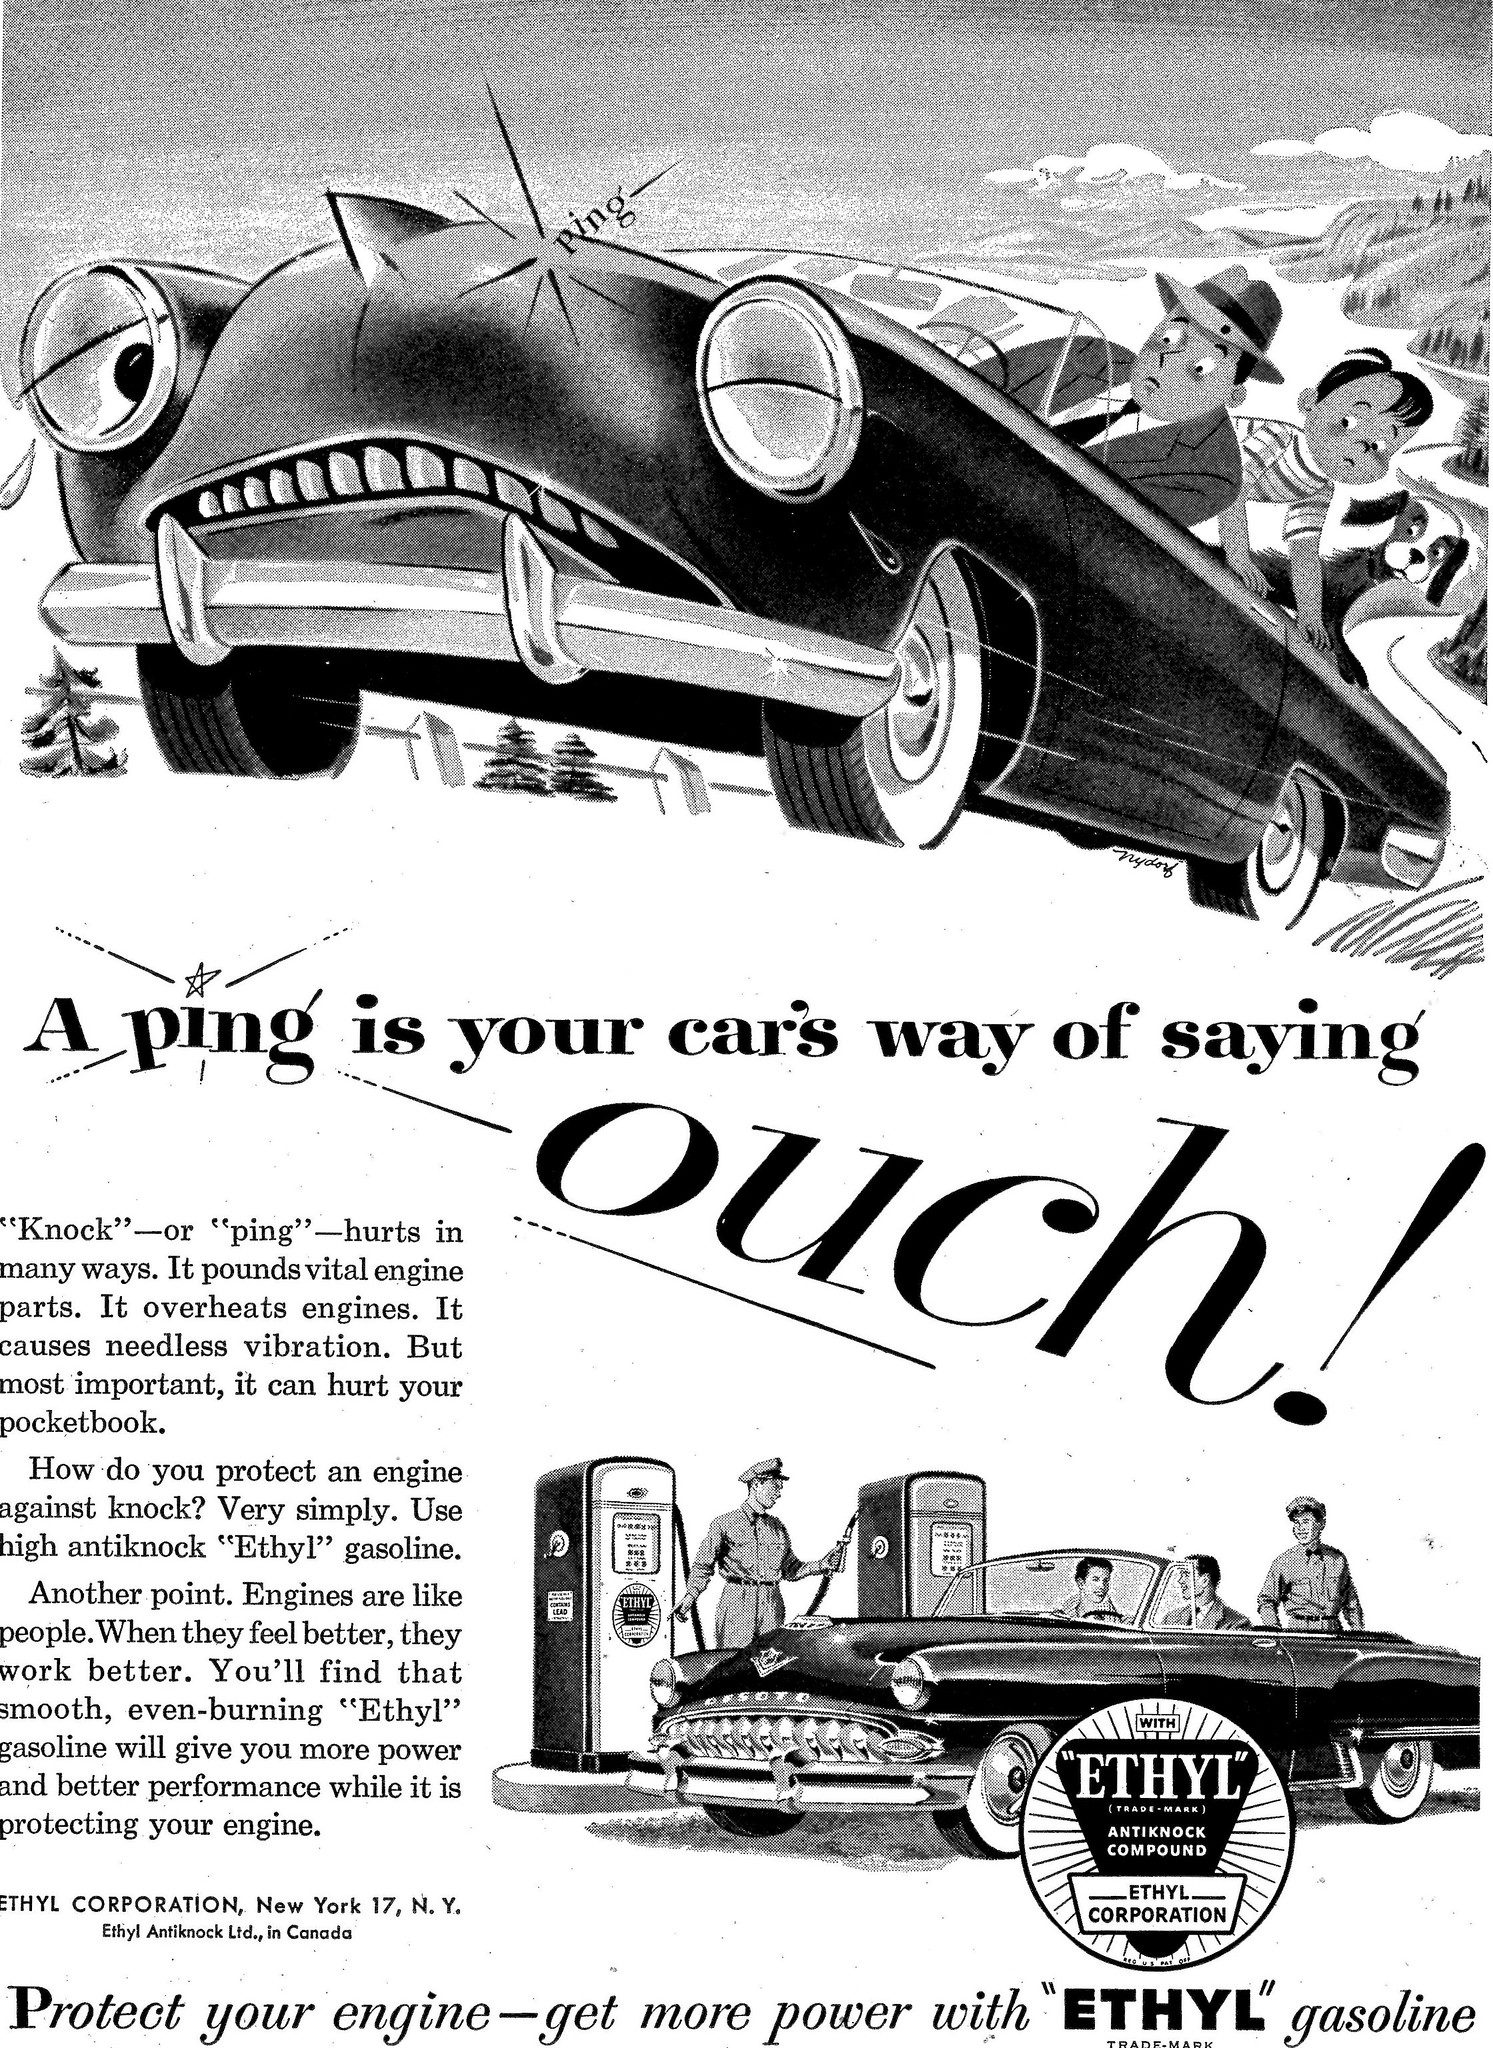 An illustrated ad for Ethyl that promised to stop engine knocking. Ad says "A ping is your car's way of saying "ouch!"